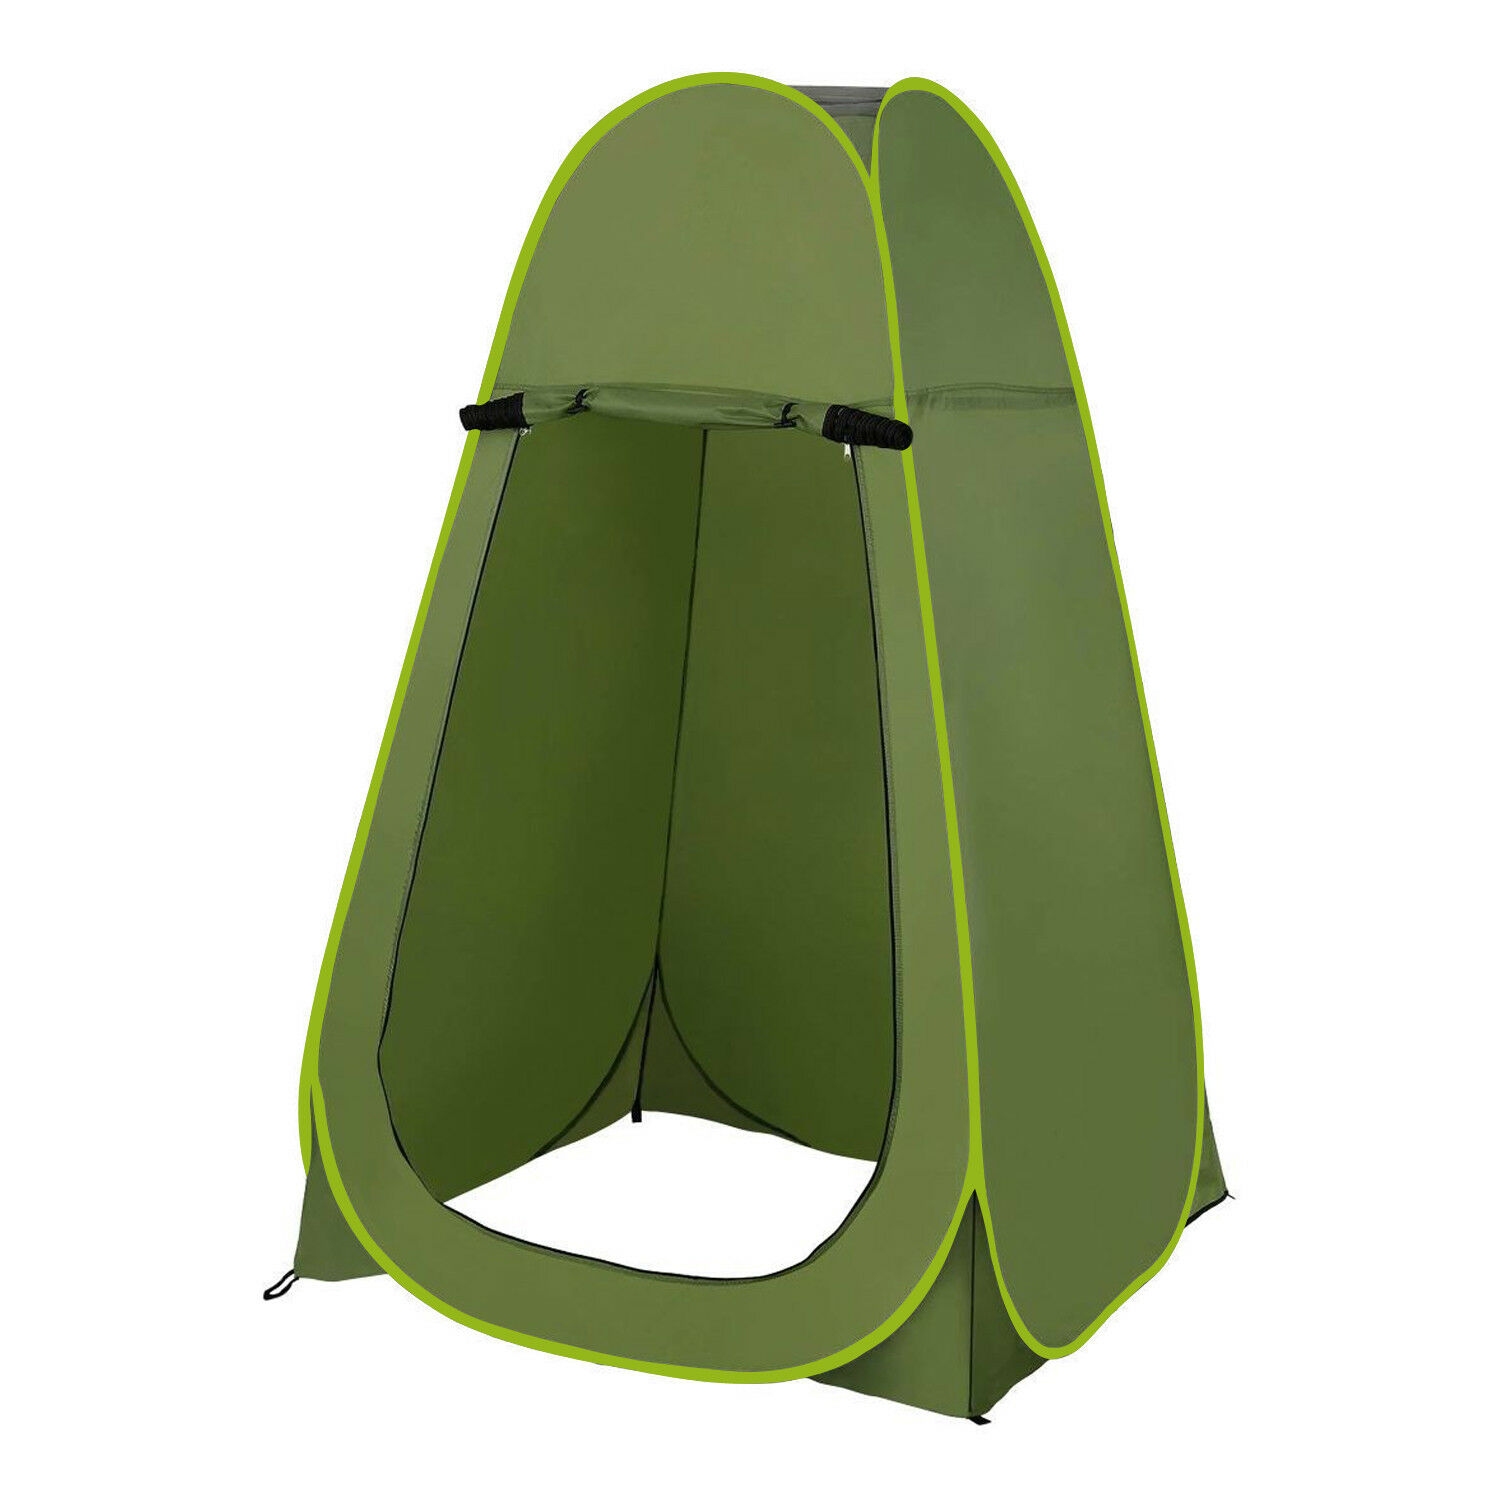 Green Outdoor Portable Instant Pop Up Tent Camping Shower Toilet Privacy Changing Room